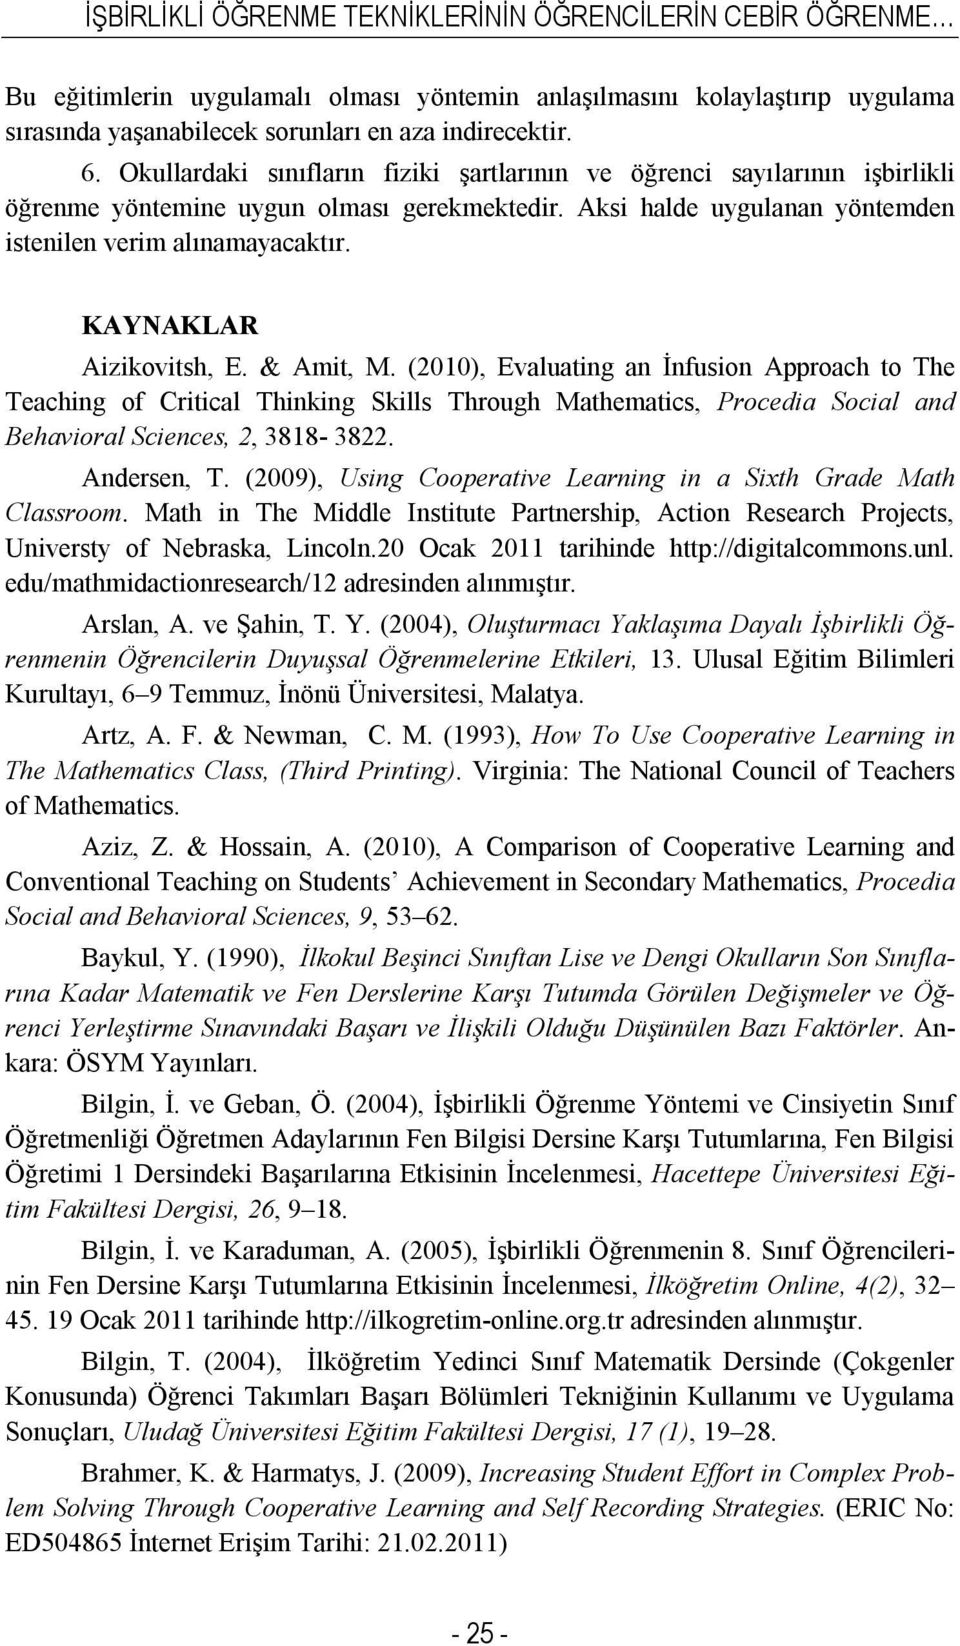 KAYNAKLAR Aizikovitsh, E. & Amit, M. (2010), Evaluating an İnfusion Approach to The Teaching of Critical Thinking Skills Through Mathematics, Procedia Social and Behavioral Sciences, 2, 3818-3822.